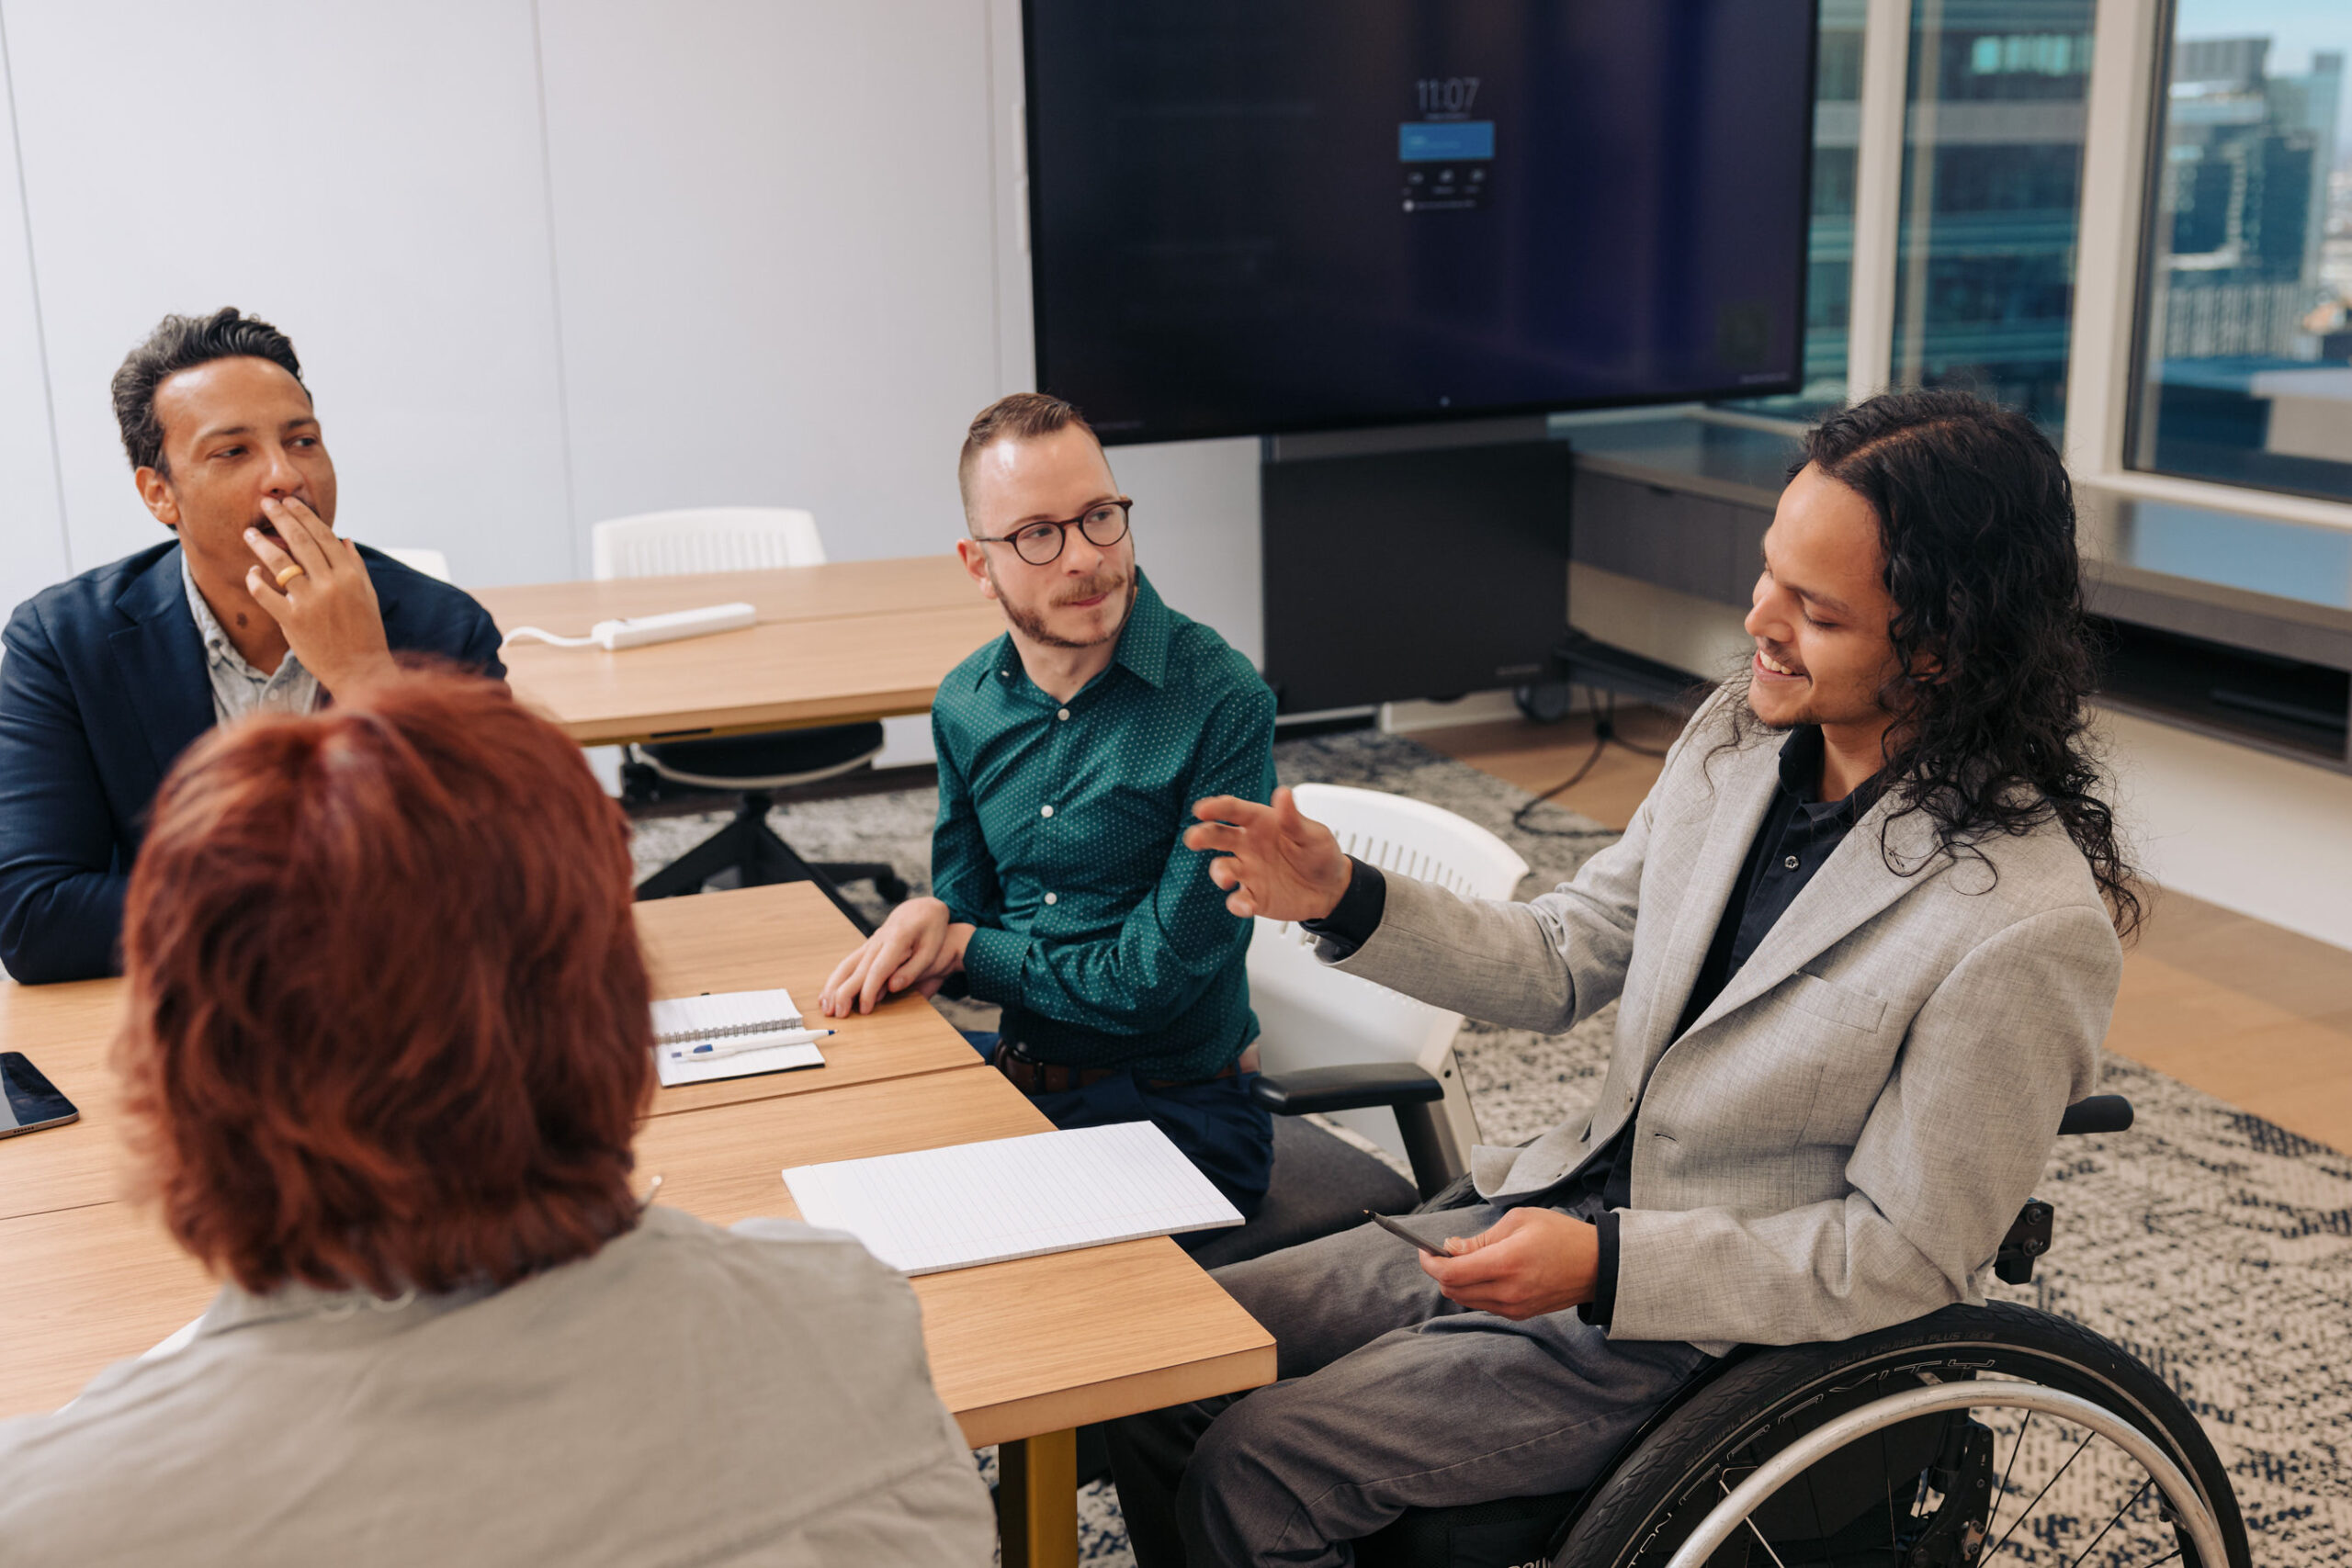 A young man who uses a wheelchair speaks to his colleagues during a meeting. They are seated around a conference table scattered with papers.